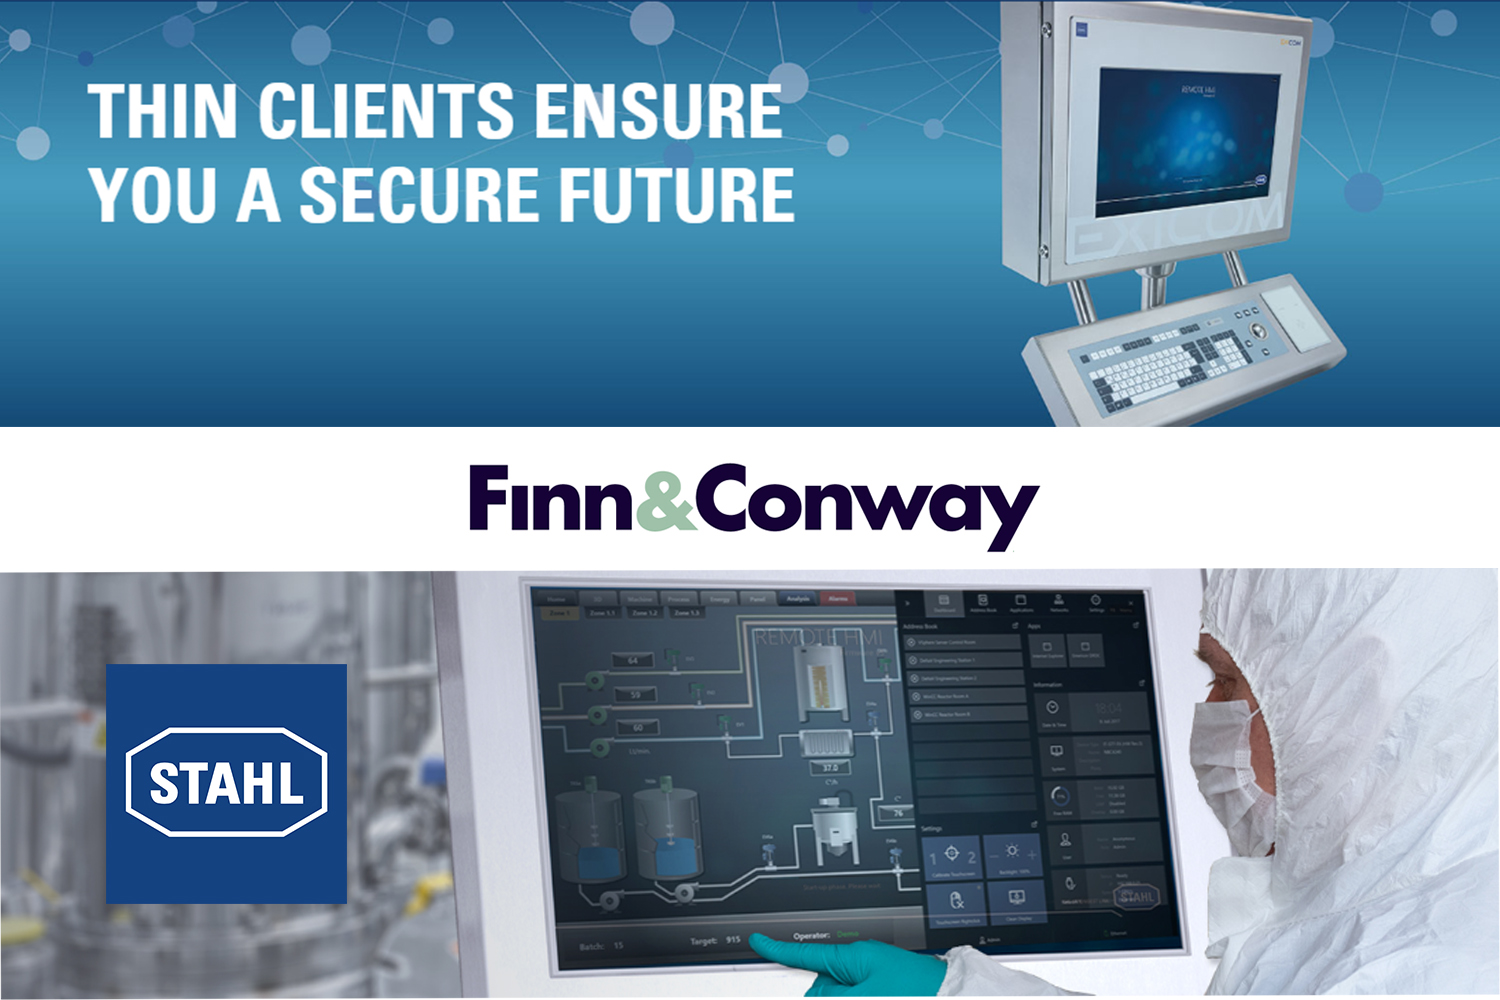 THIN CLIENTS ENSURE YOU A SECURE FUTURE